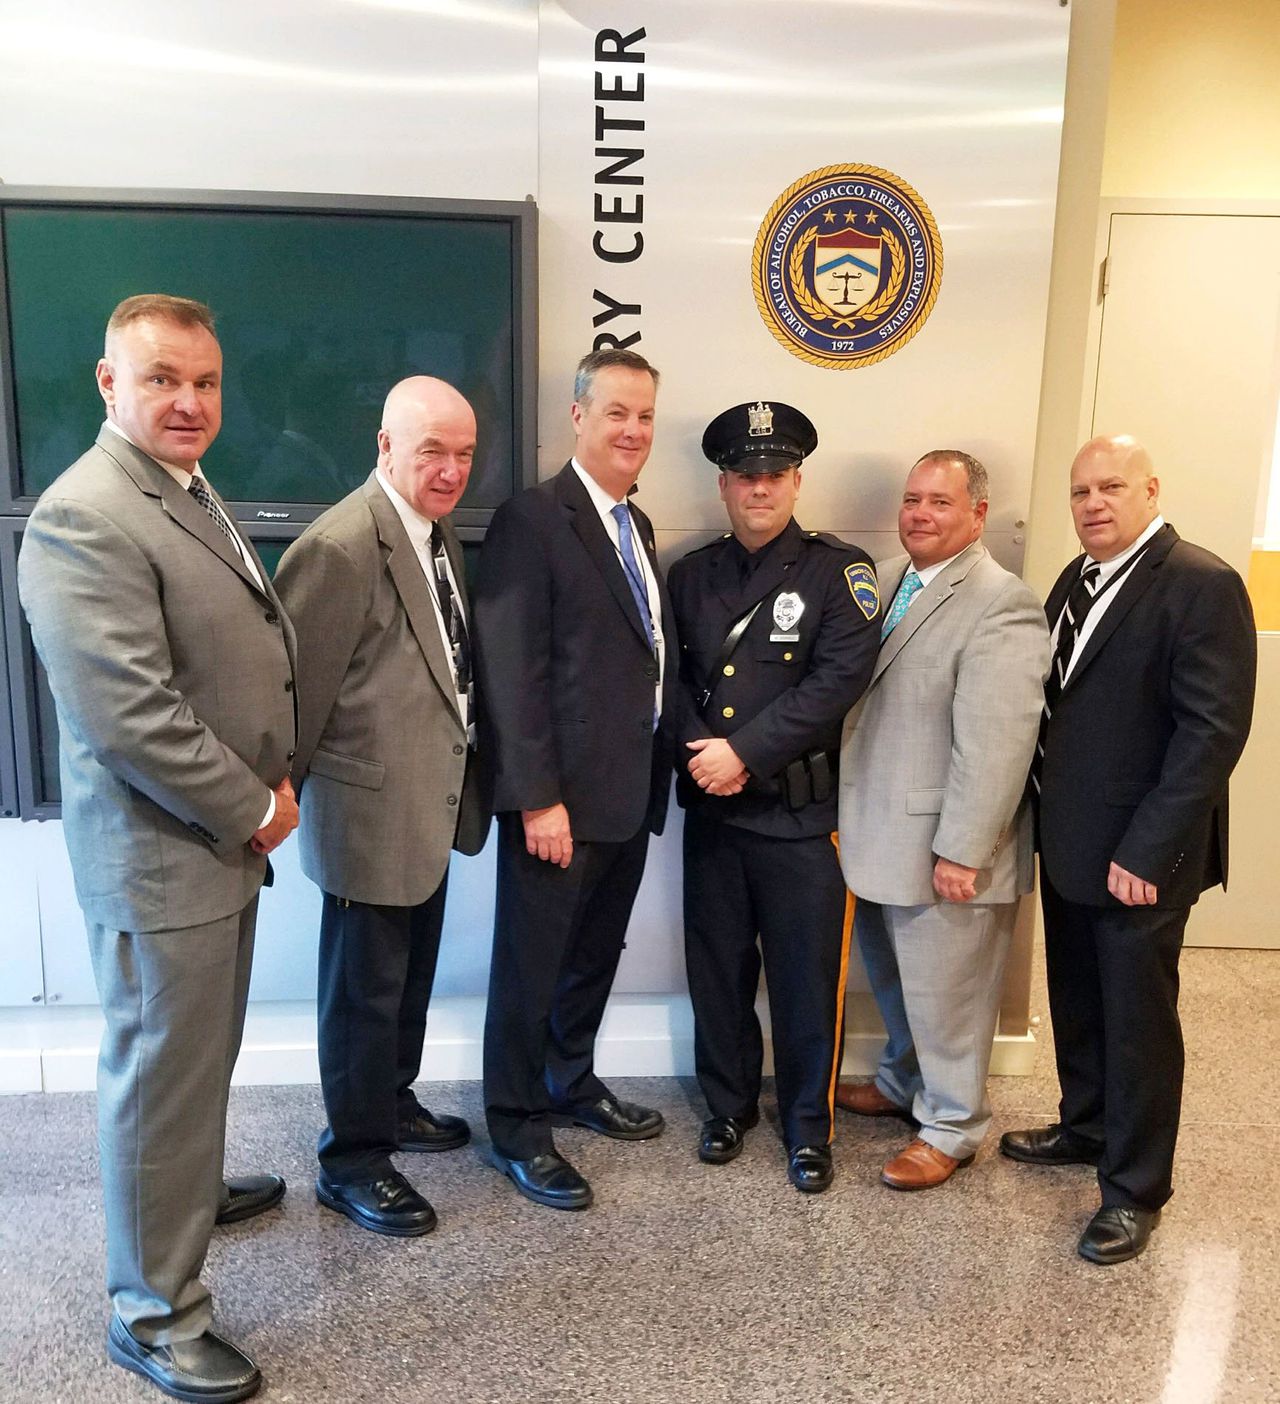 Union County police officer graduates from ATF academy